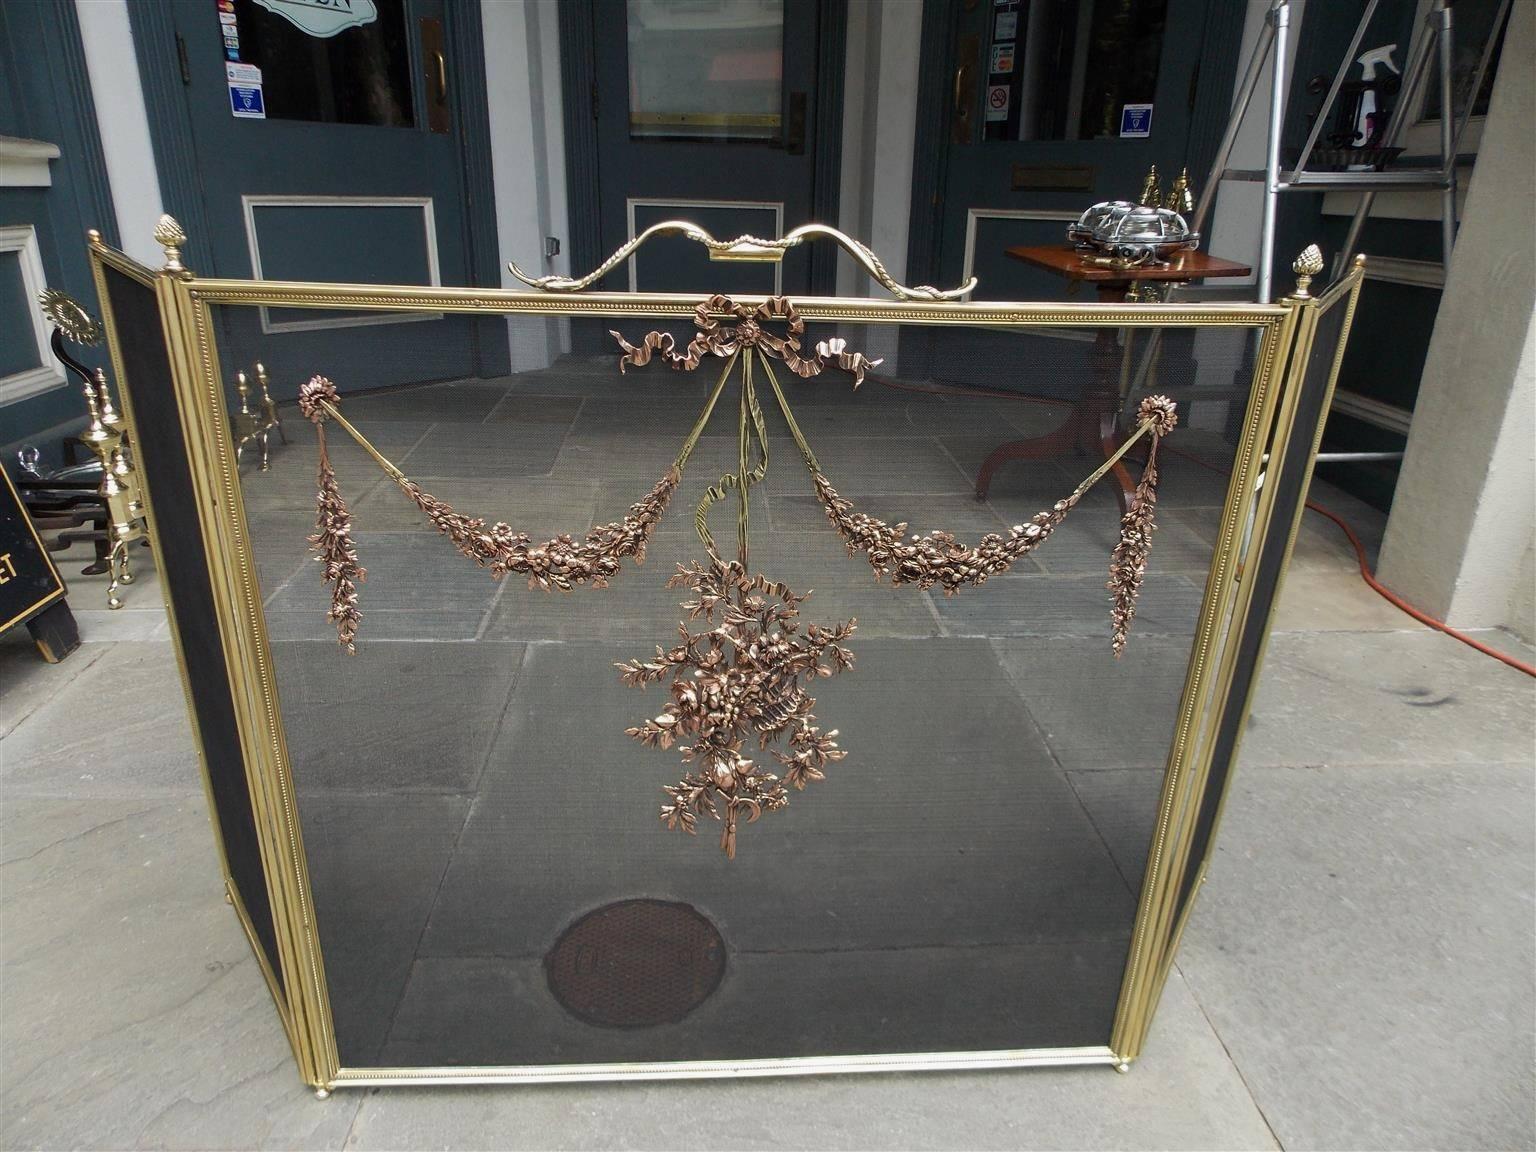 French brass and copper free standing three panel fire screen with centered floral handle, decorative ribbon motif, floral rosette swags, lower flower basket, and corner artichoke finials, Mid-19th century.  Middle screen panel is 31.5